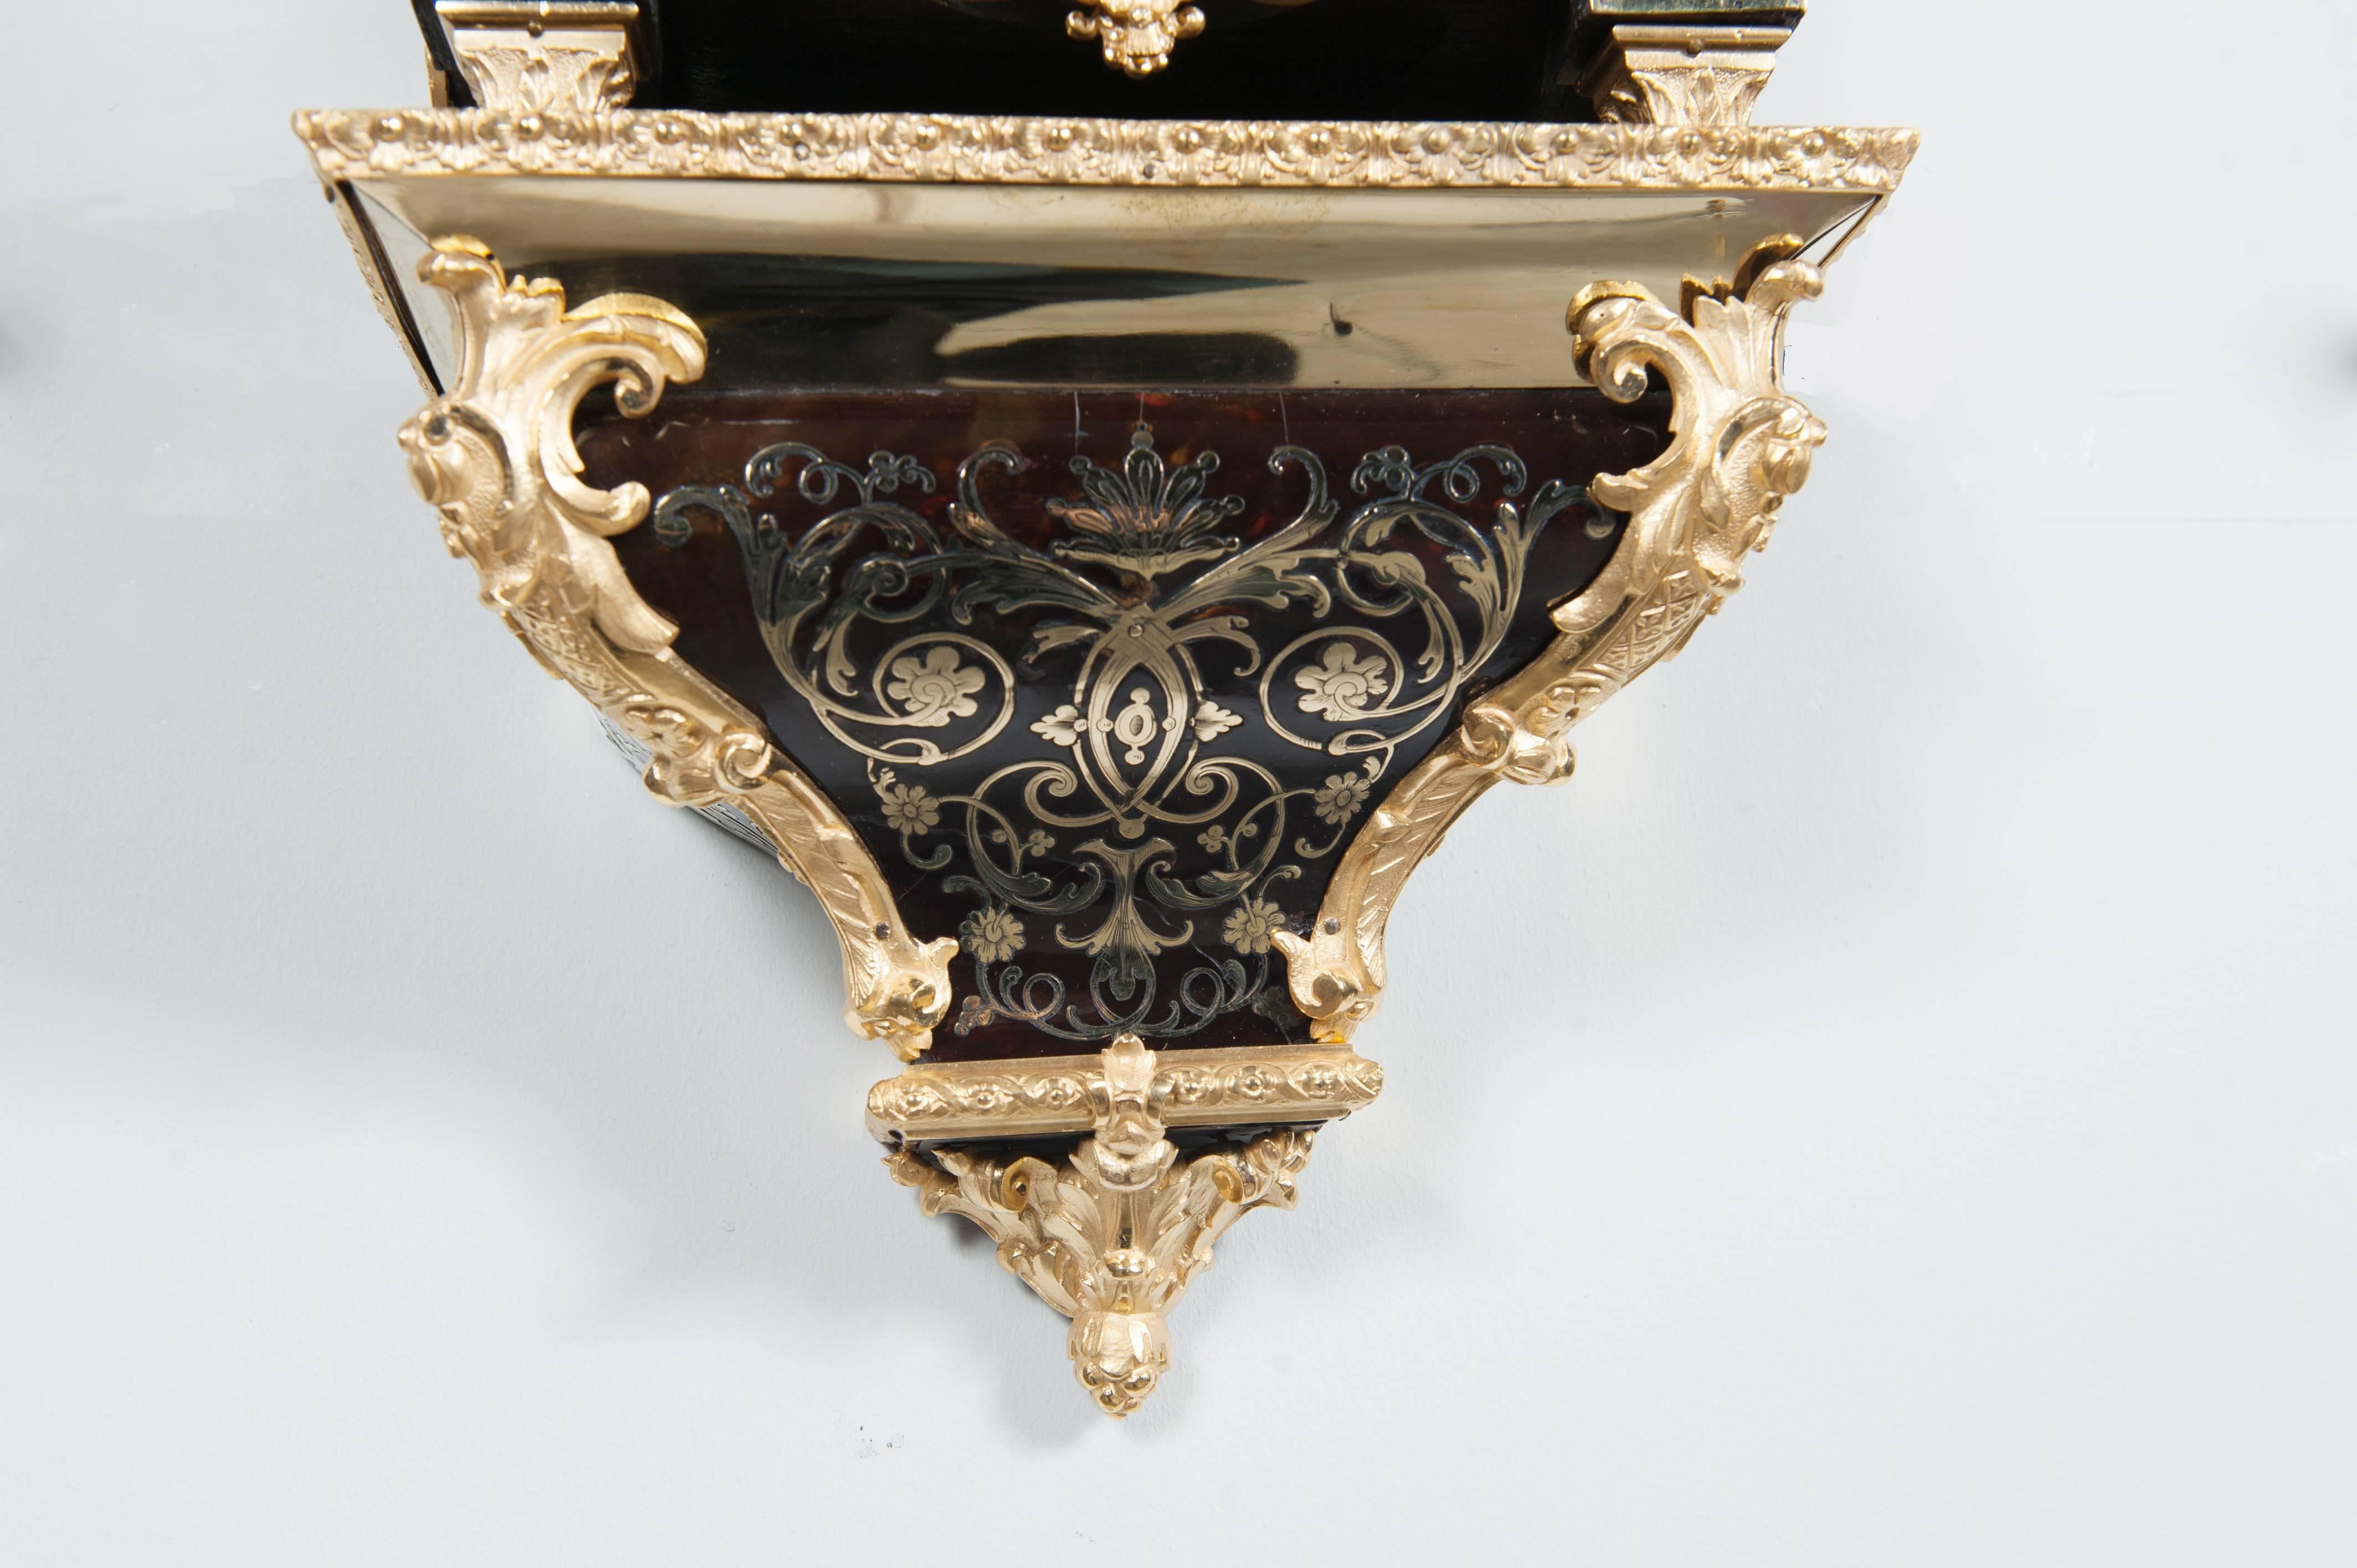 Small Decorative Louis XIV Boulle Inlaid Bracket Clock, circa 1720 For Sale 1